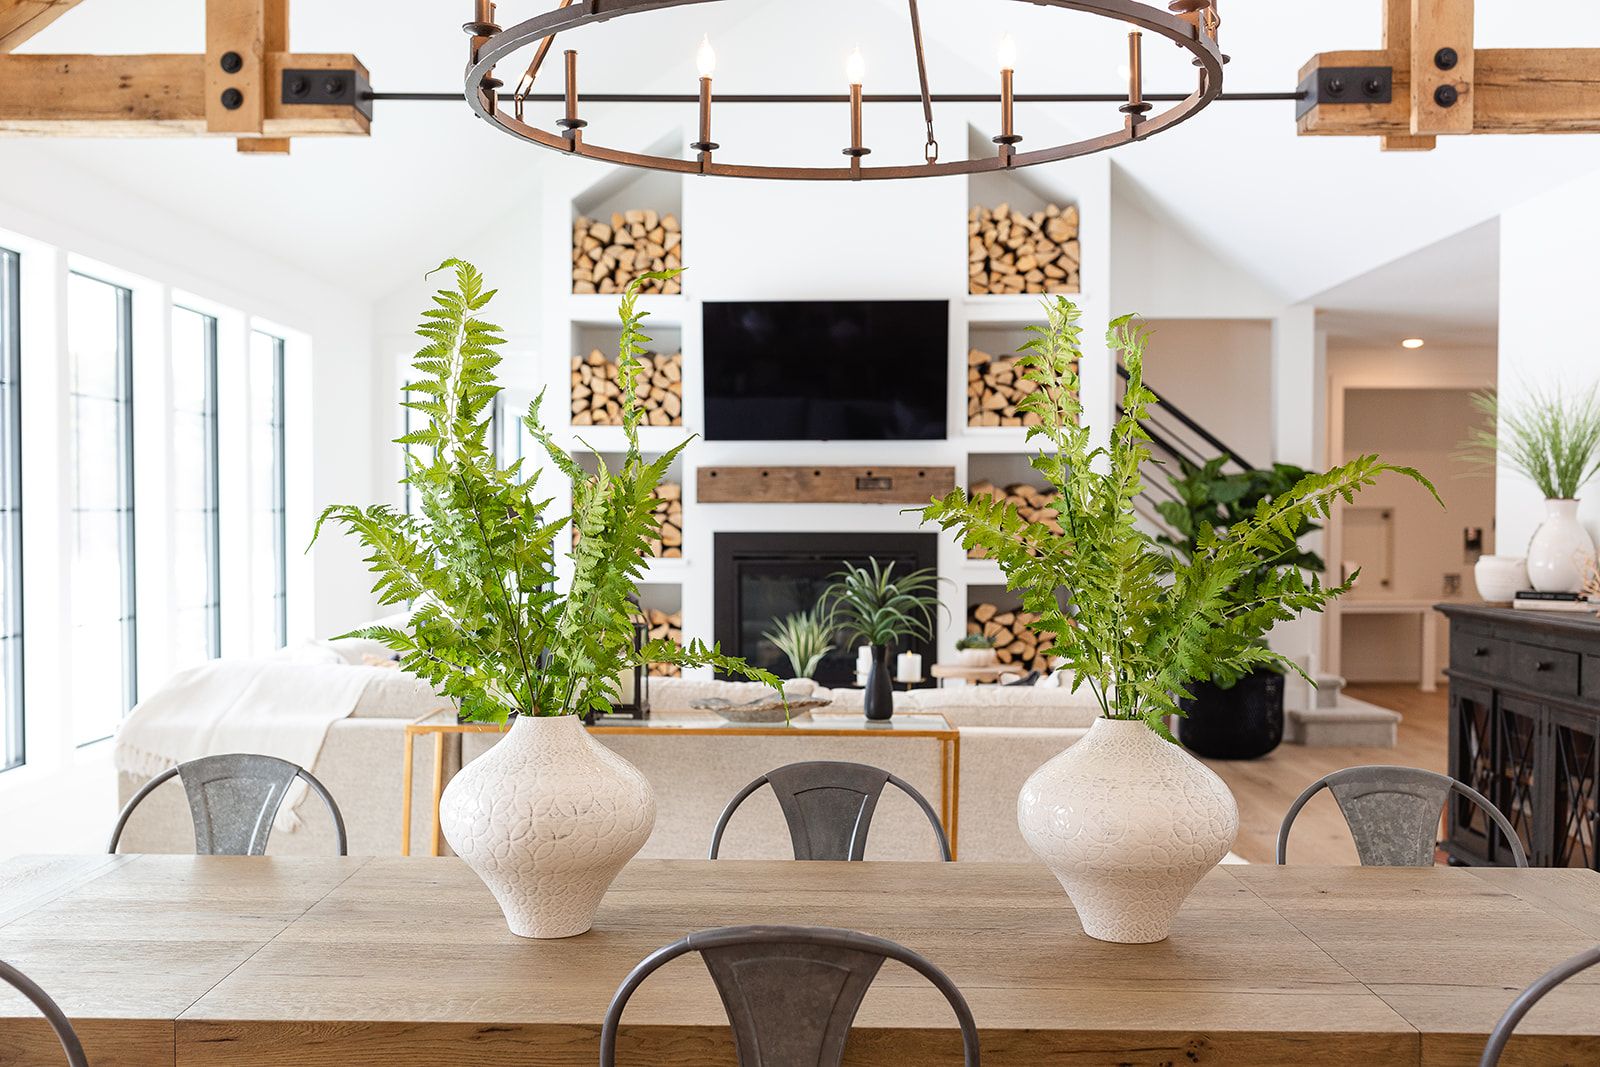 A photo showing the interior of a home with a fireplace flanked with shelving full of cut wood, metal dining chairs near an island and two plants as accents